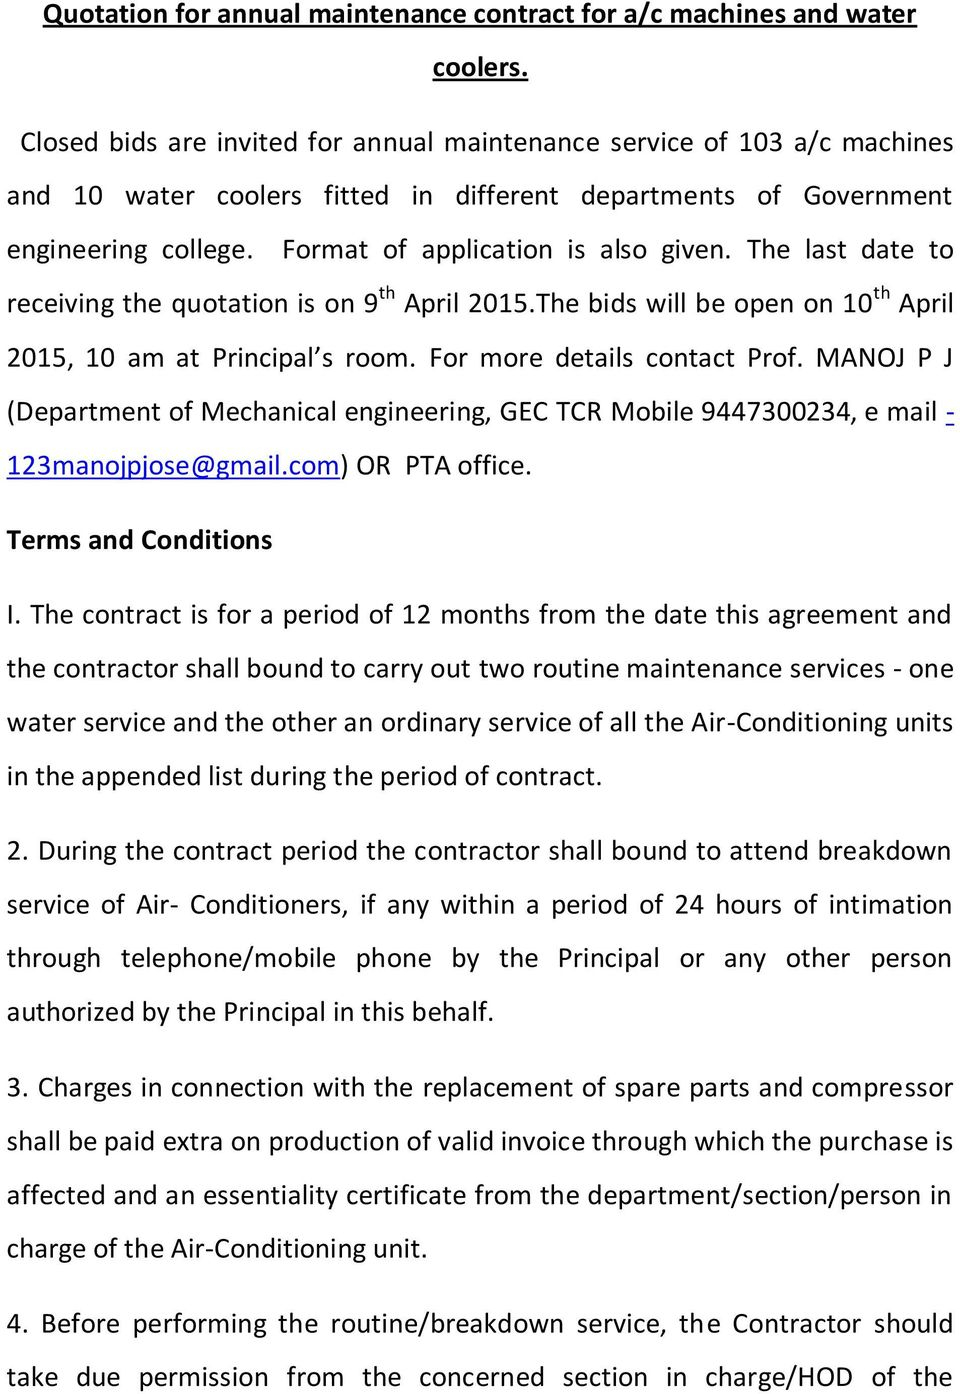 Maintenance Agreement Terms And Conditions Quotation For Annual Maintenance Contract For Ac Machines And Water